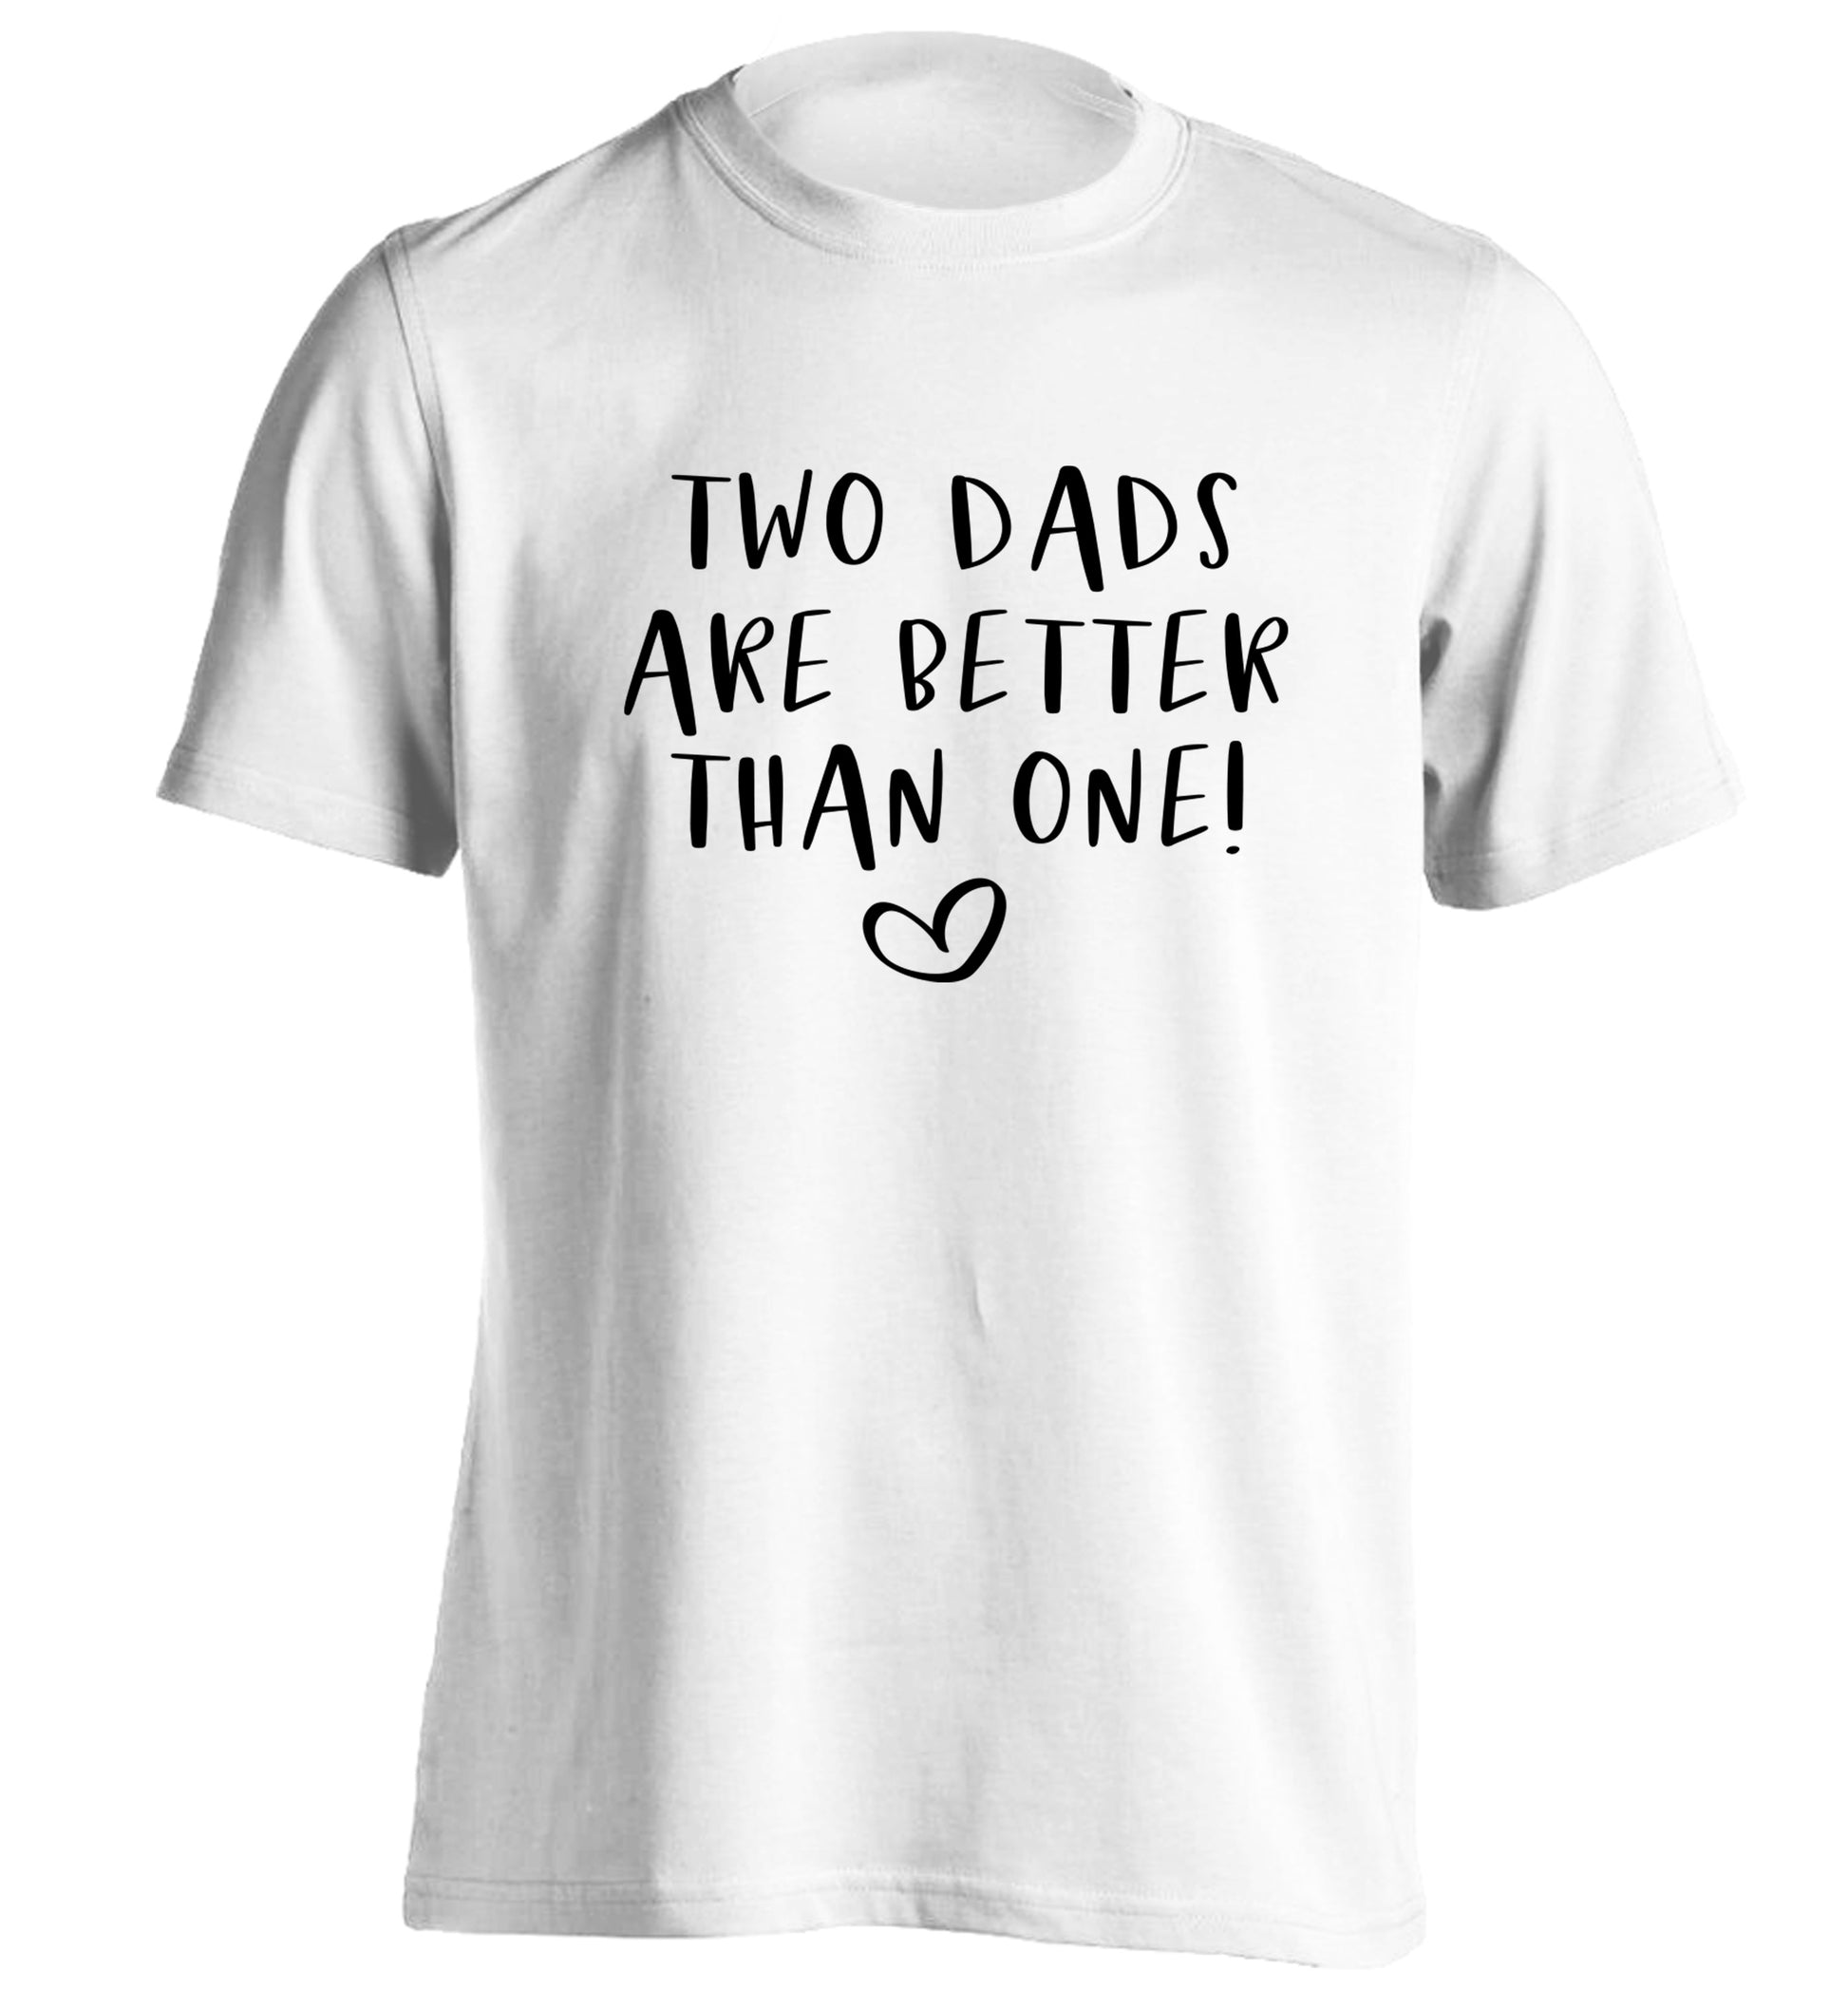 Two dads are better than one adults unisex white Tshirt 2XL